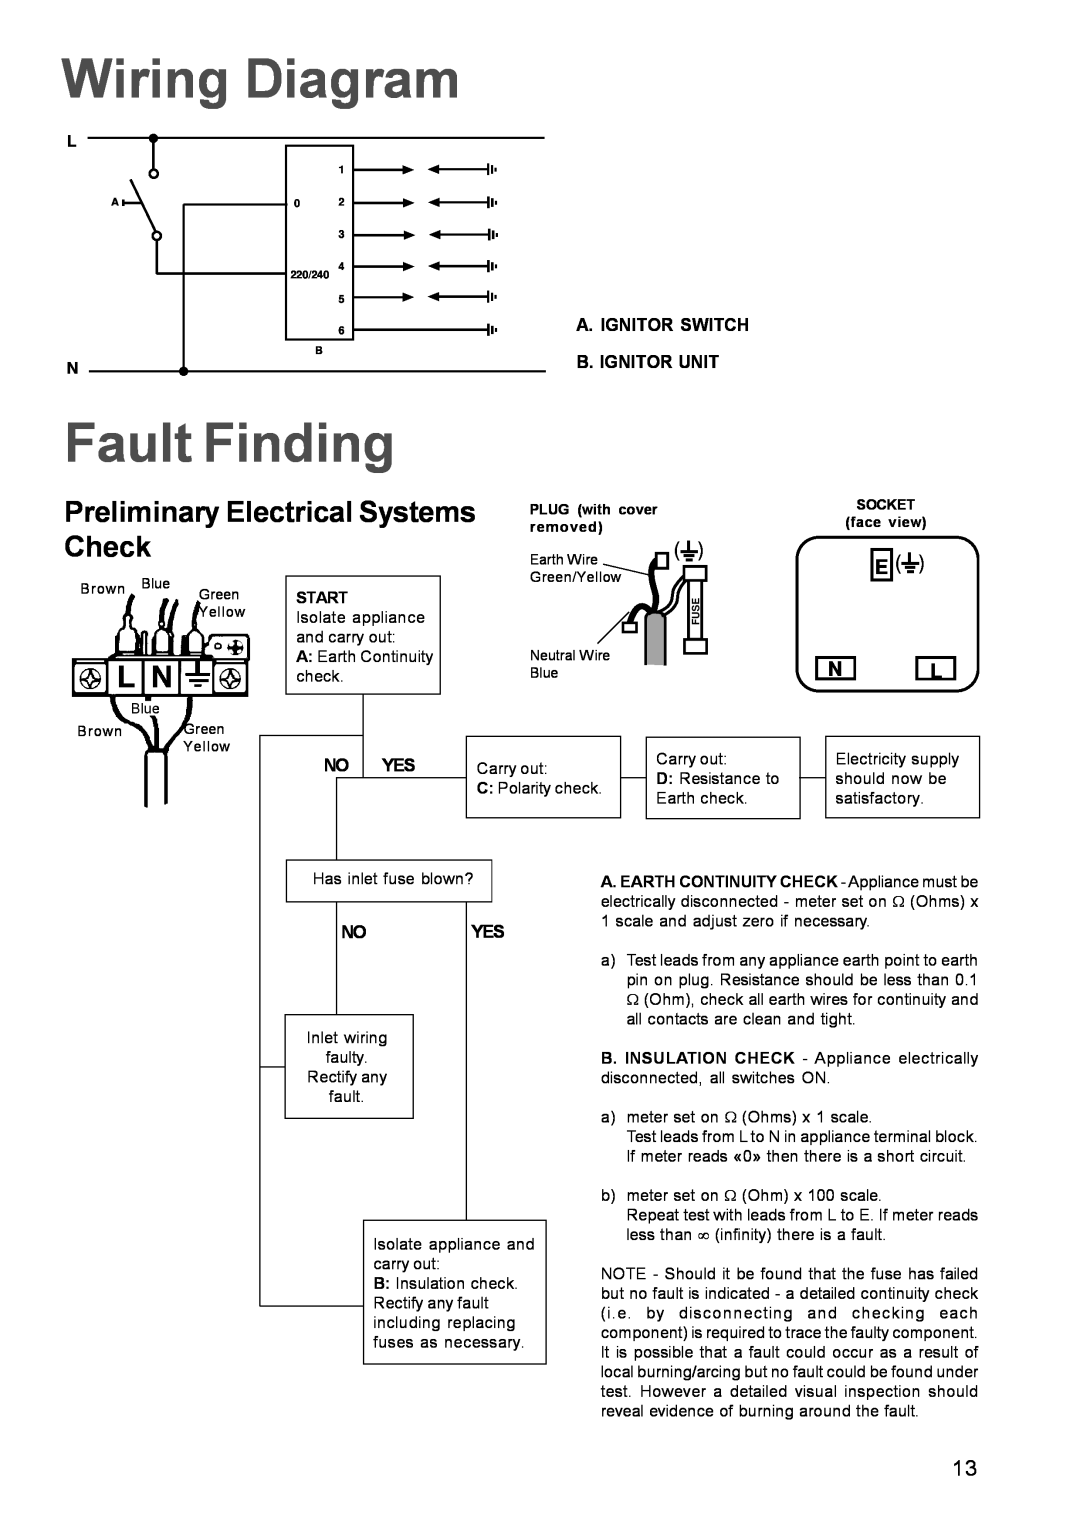 Electrolux EHG 680 manual Wiring Diagram, Fault Finding, Preliminary Electrical Systems, Check 